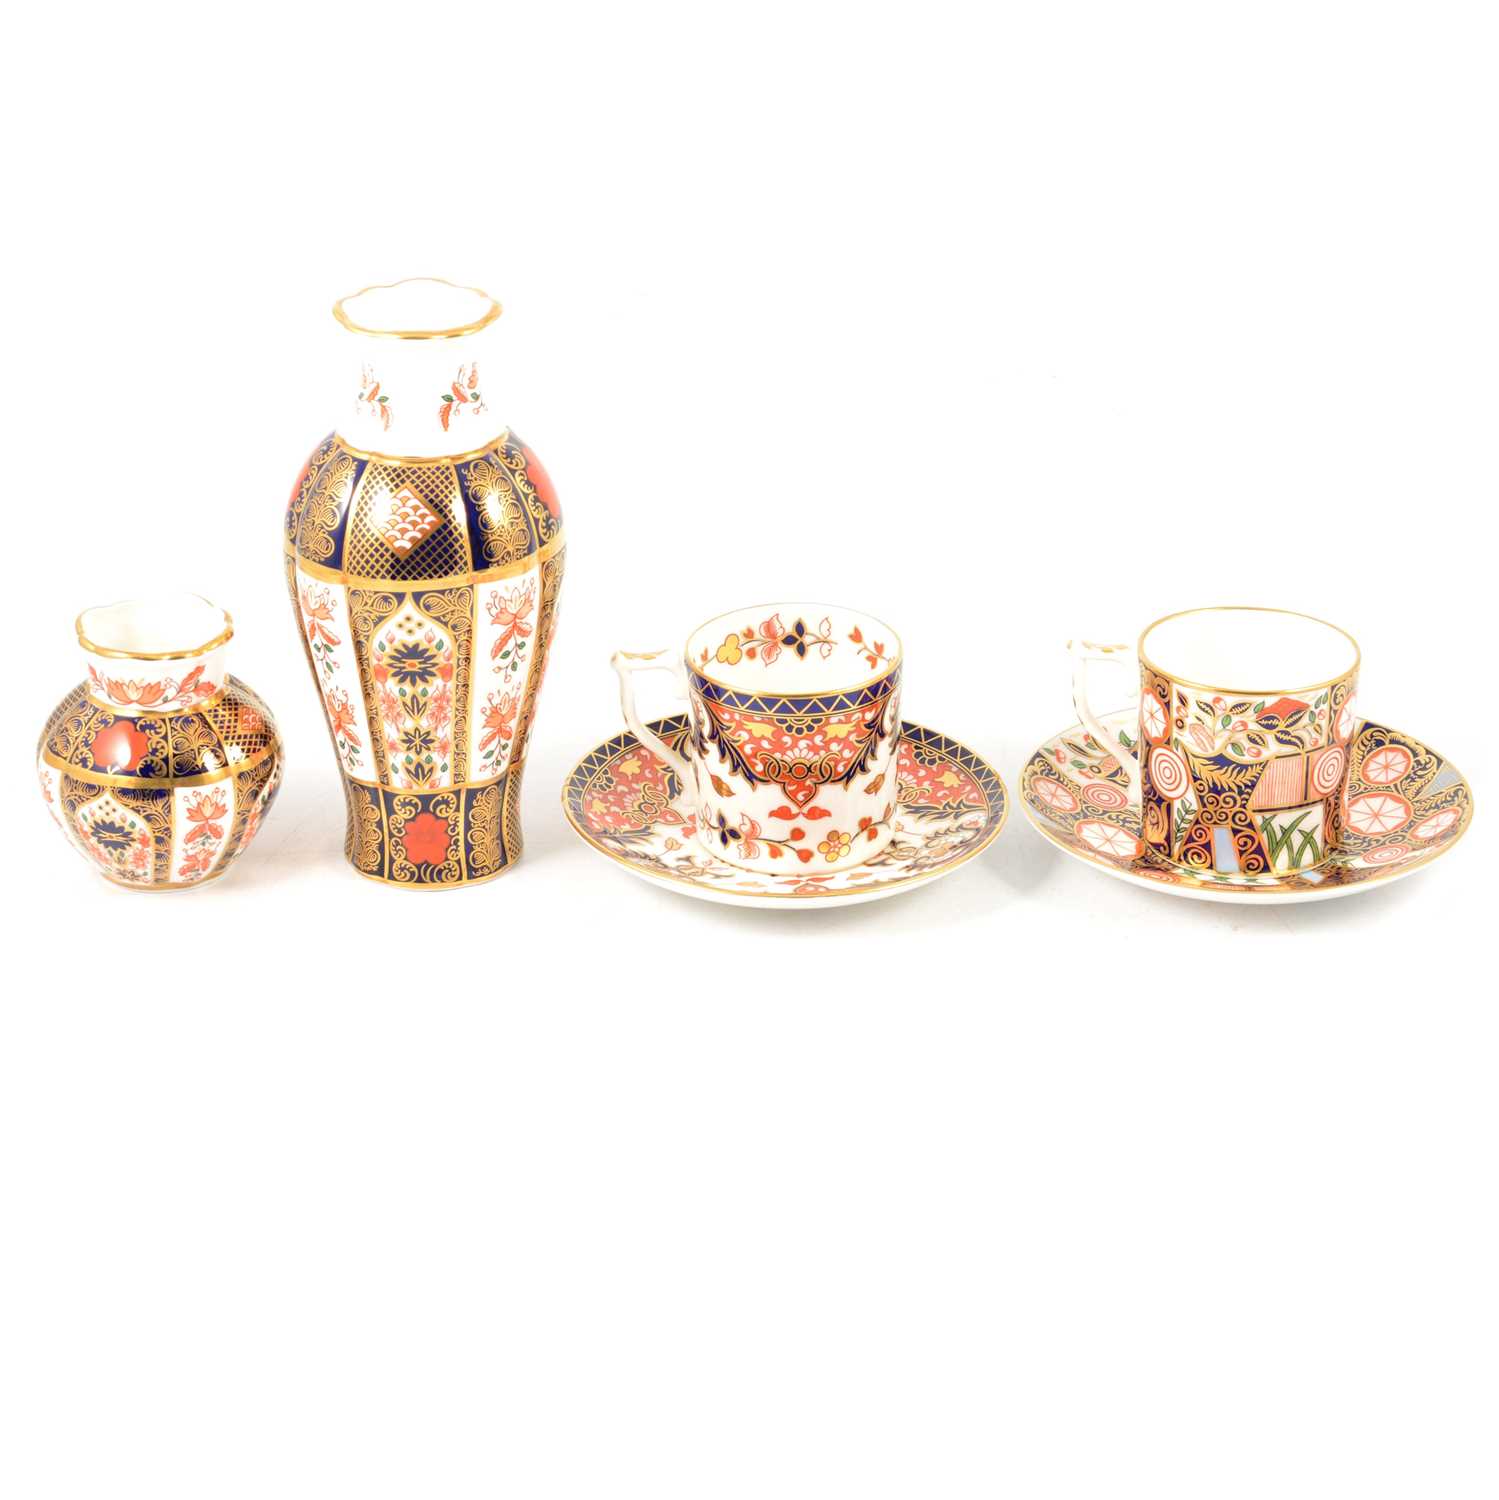 Lot 97 - Royal Crown Derby 'The Curator's Collection' set of six cups and saucers, two vases.